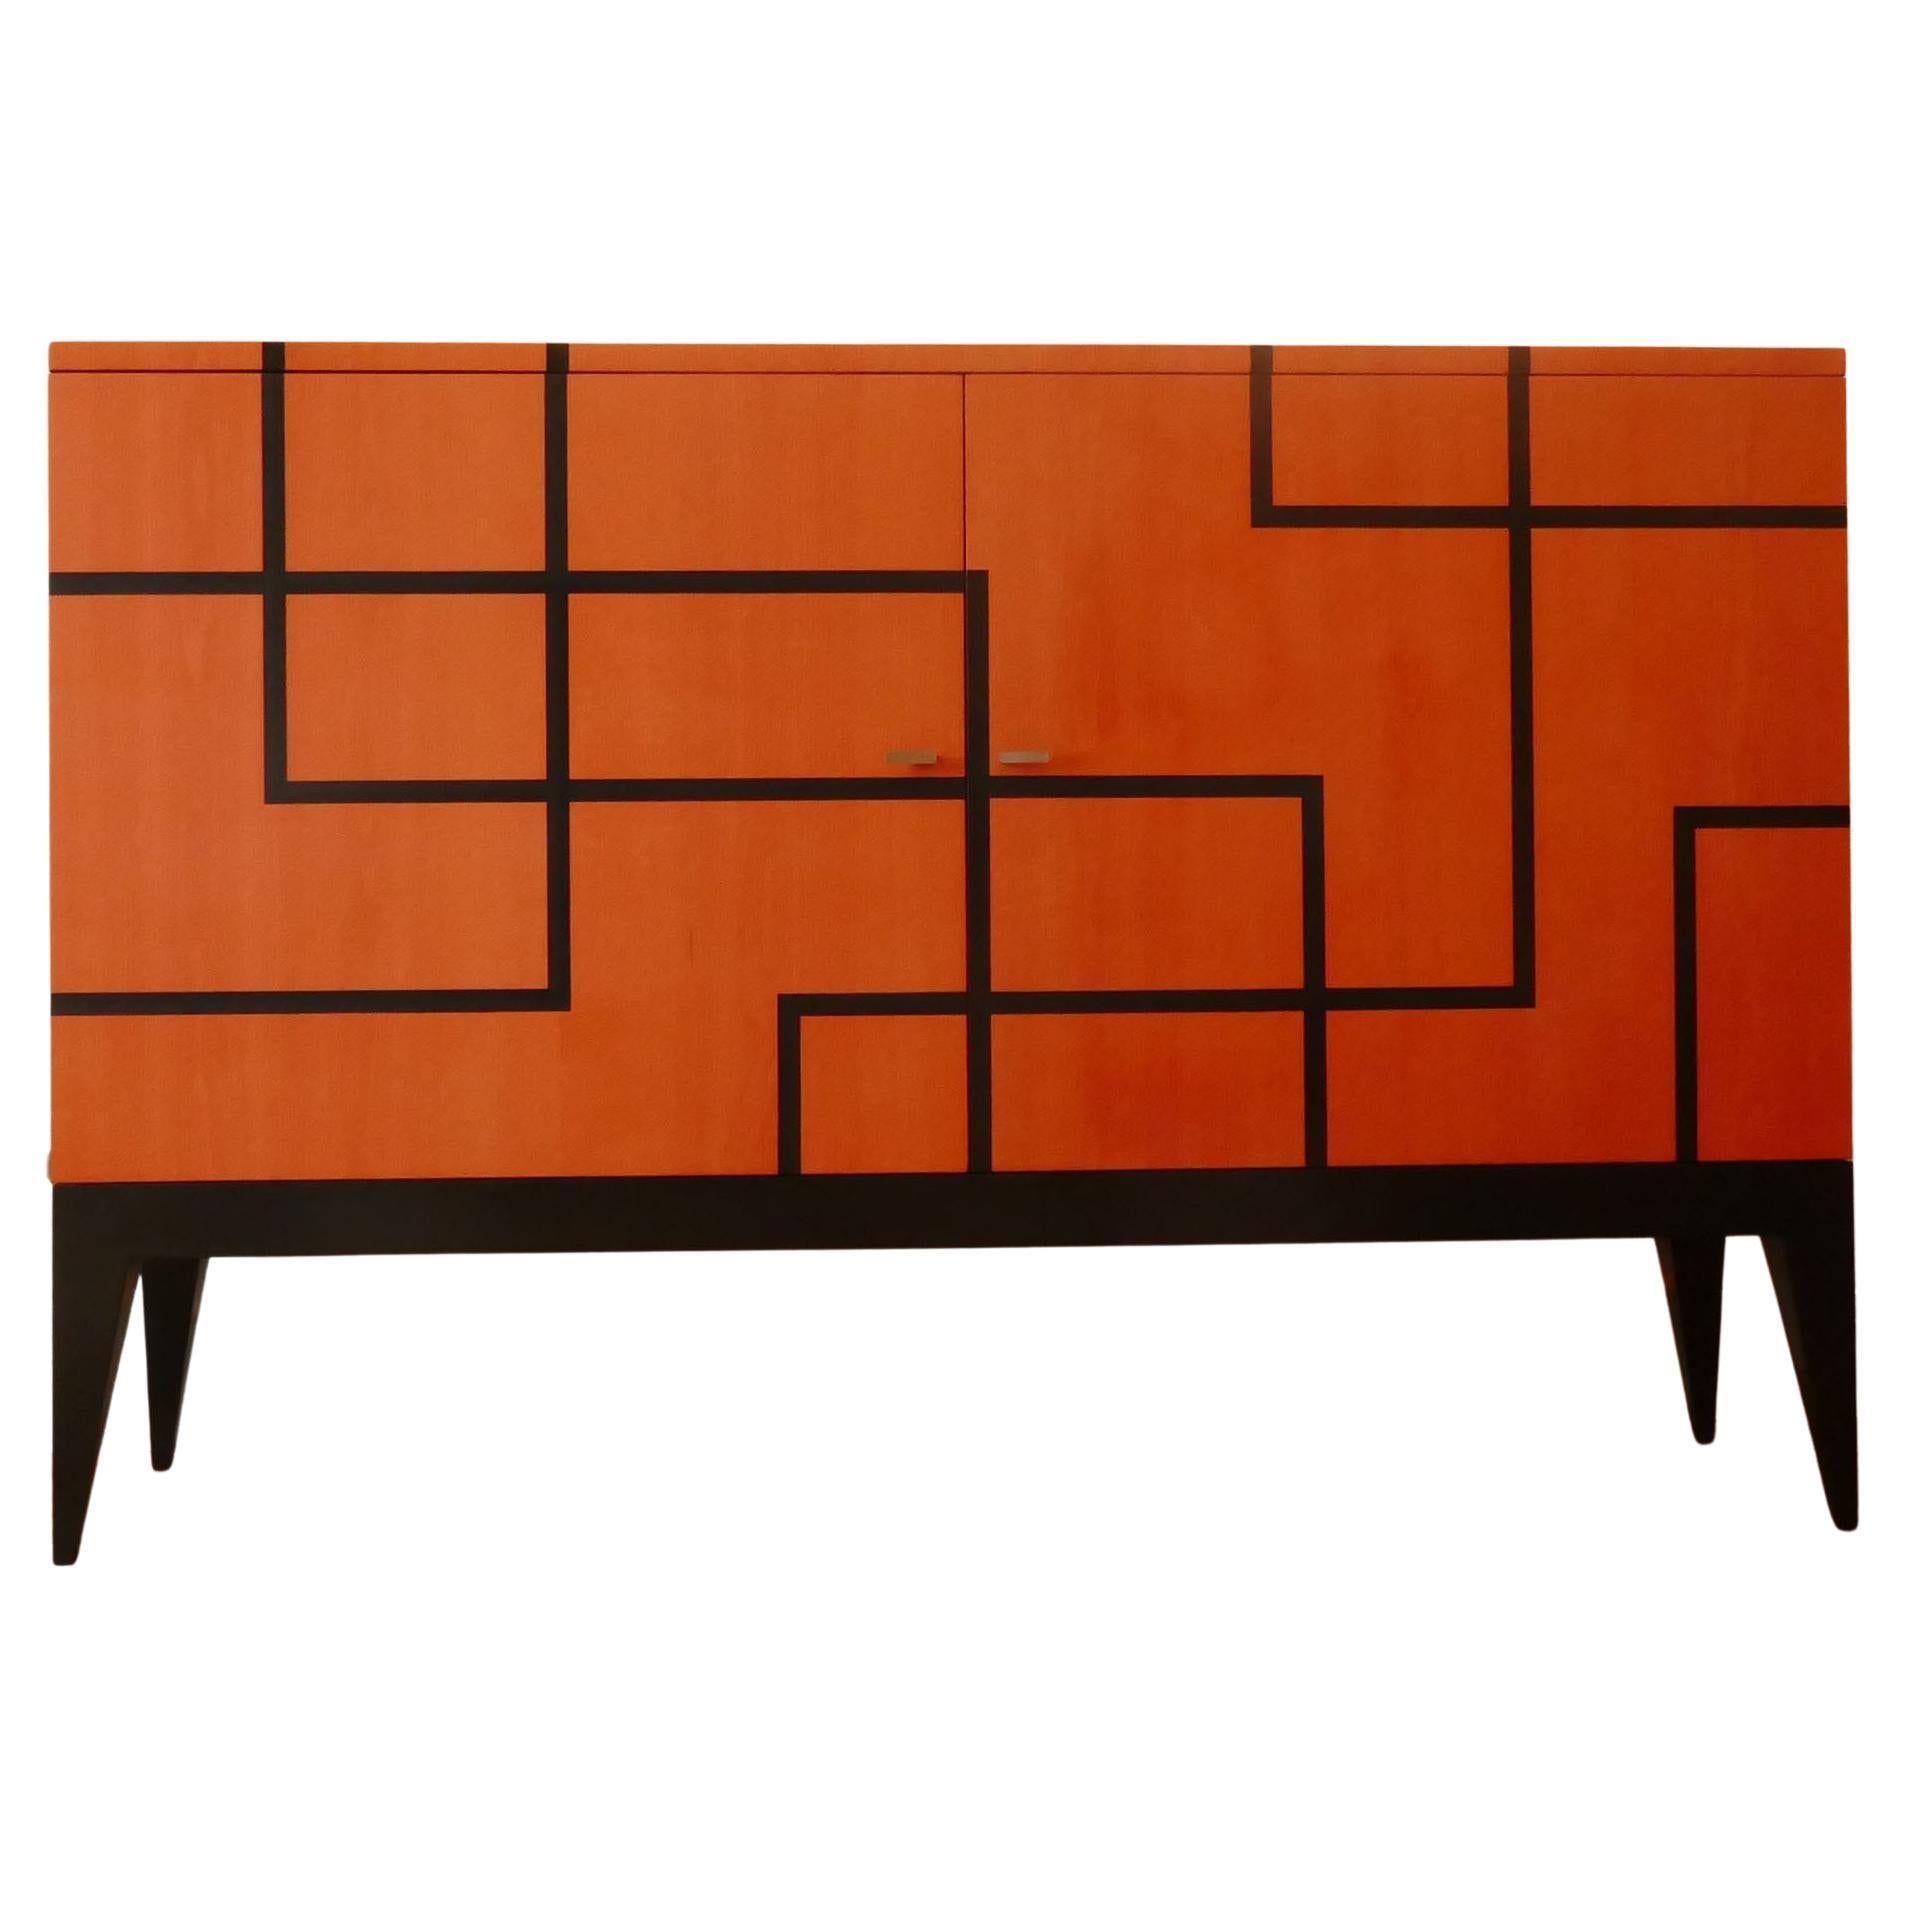 Buffet "Filets" in Hermes Orange"Feu" Black Marquetery by Aymeric Lefort For Sale